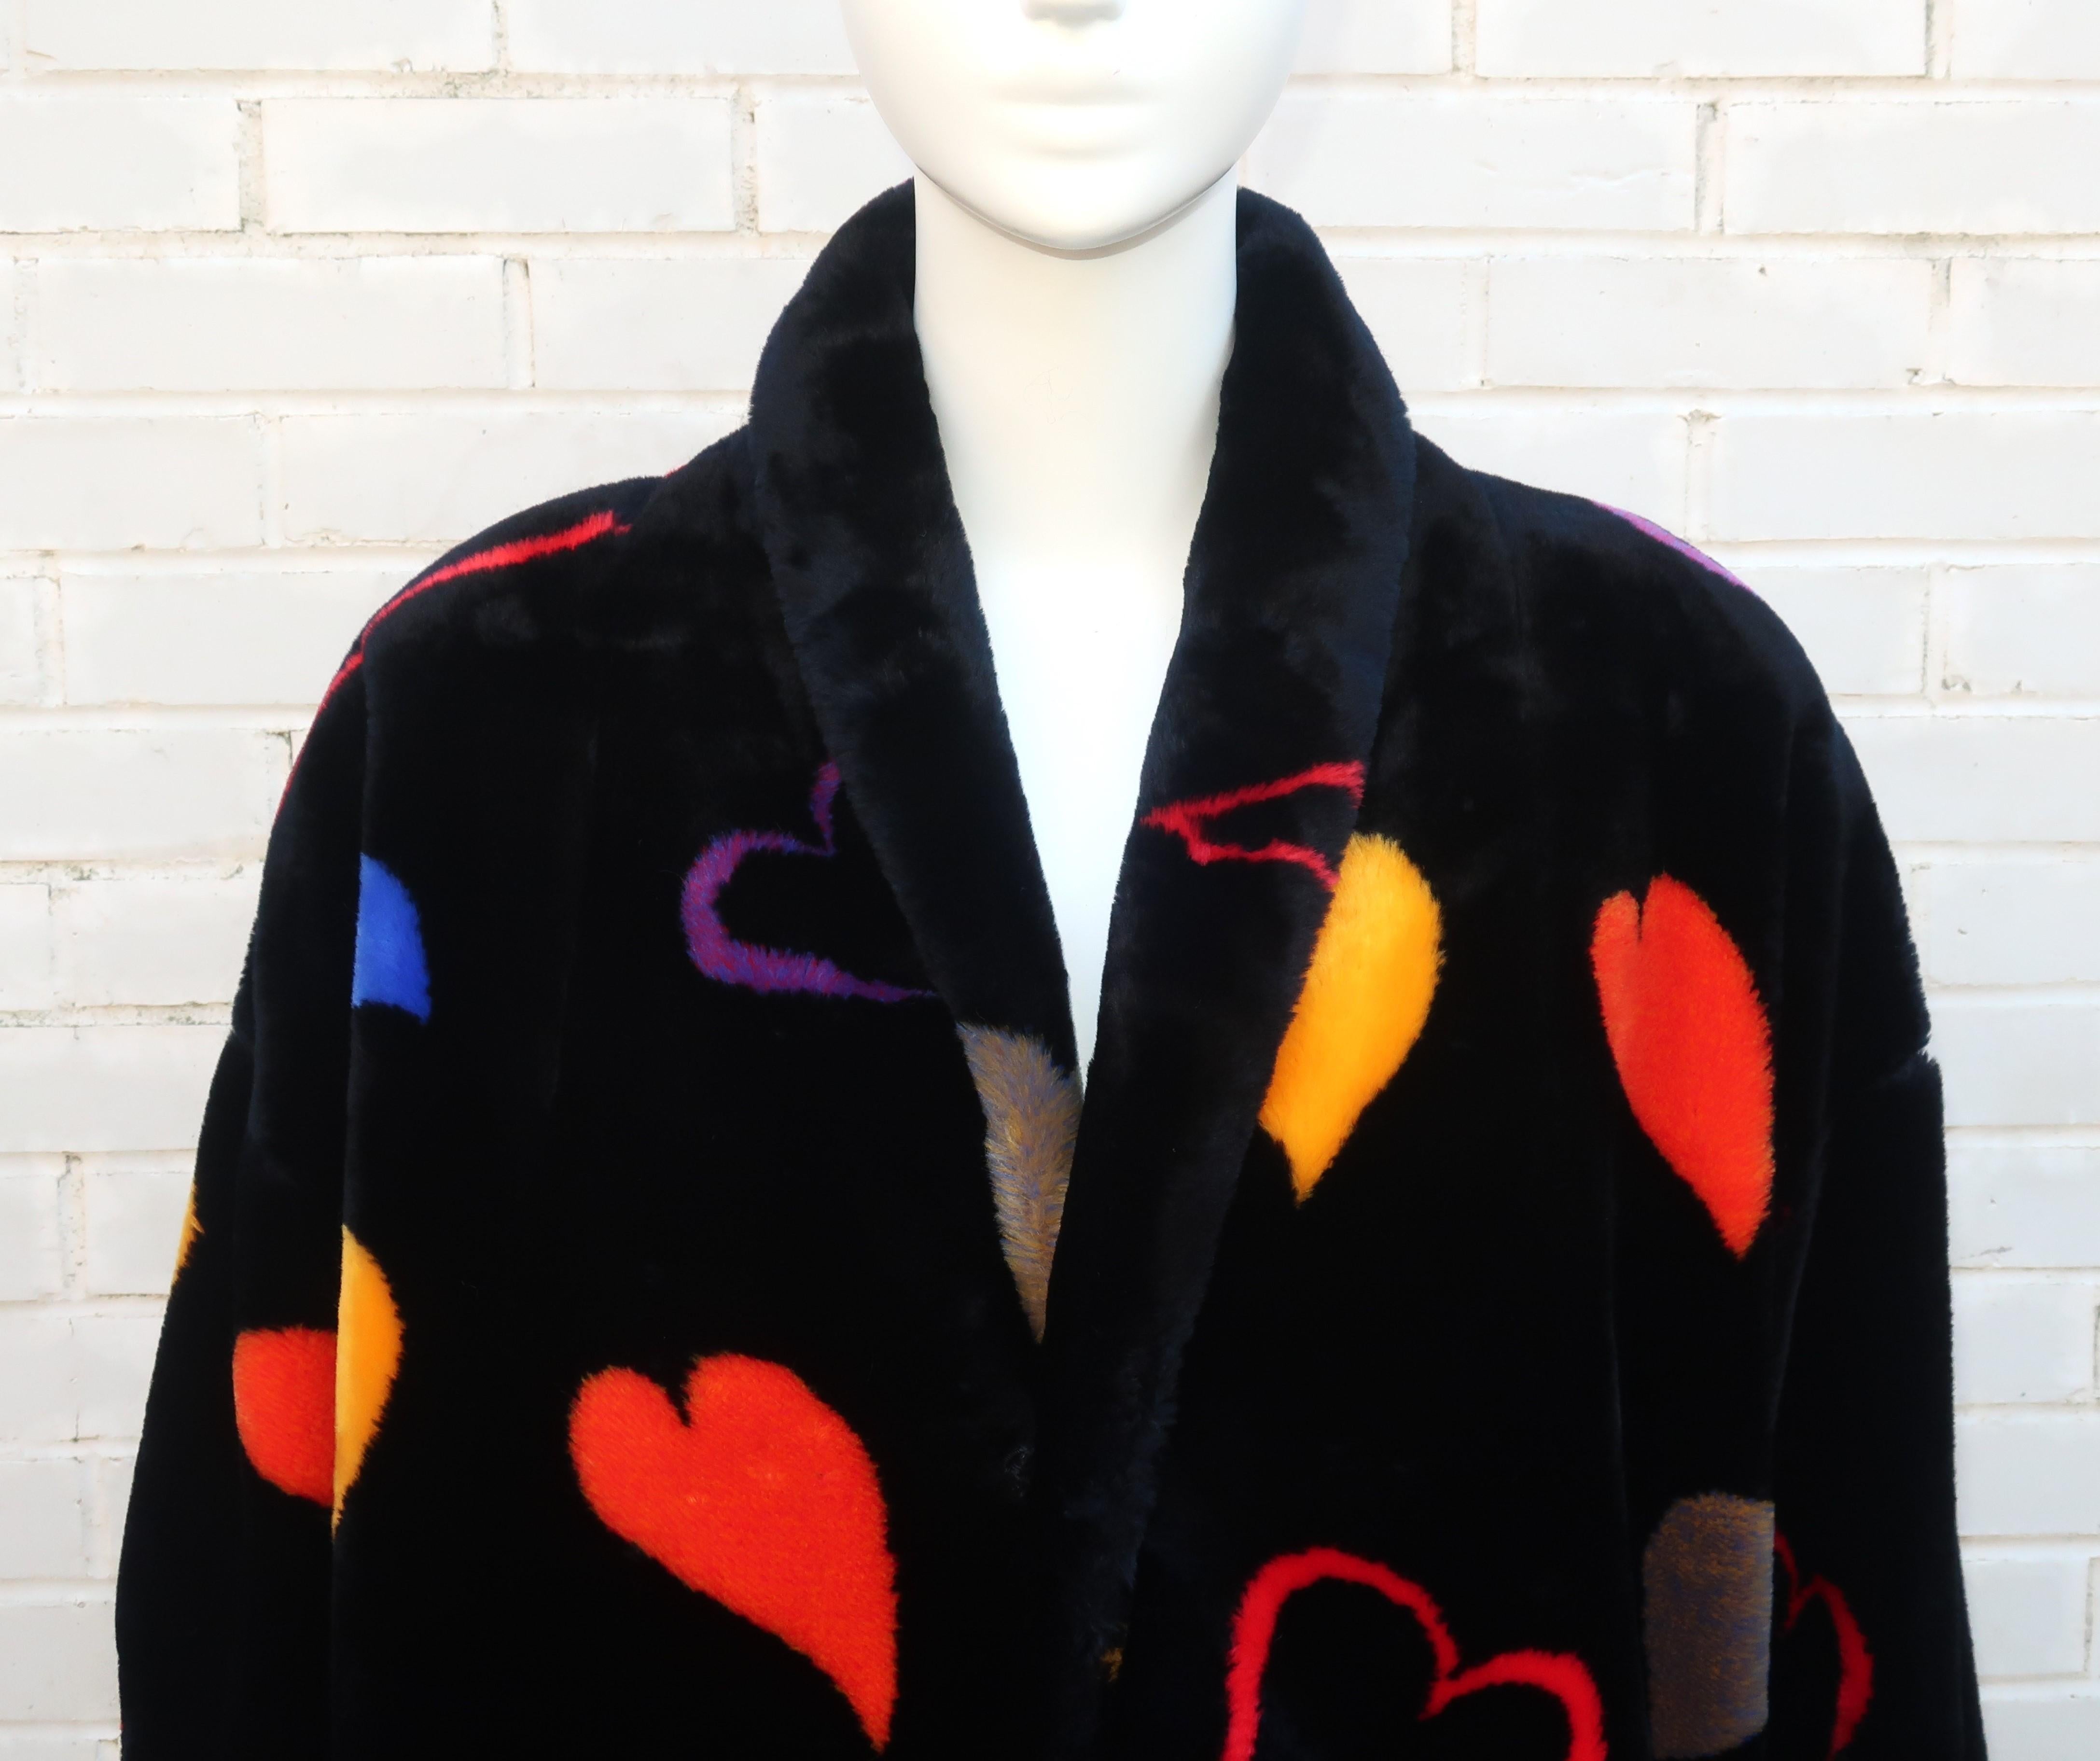 Be someone’s Valentine with this ultra lush faux fur Donnybrook teddy coat with a floating hearts motif.  The comfy silhouette hooks at the front with hidden pockets and rolled cuffs at the sleeves.  The pop art style hearts would make Andy Warhol